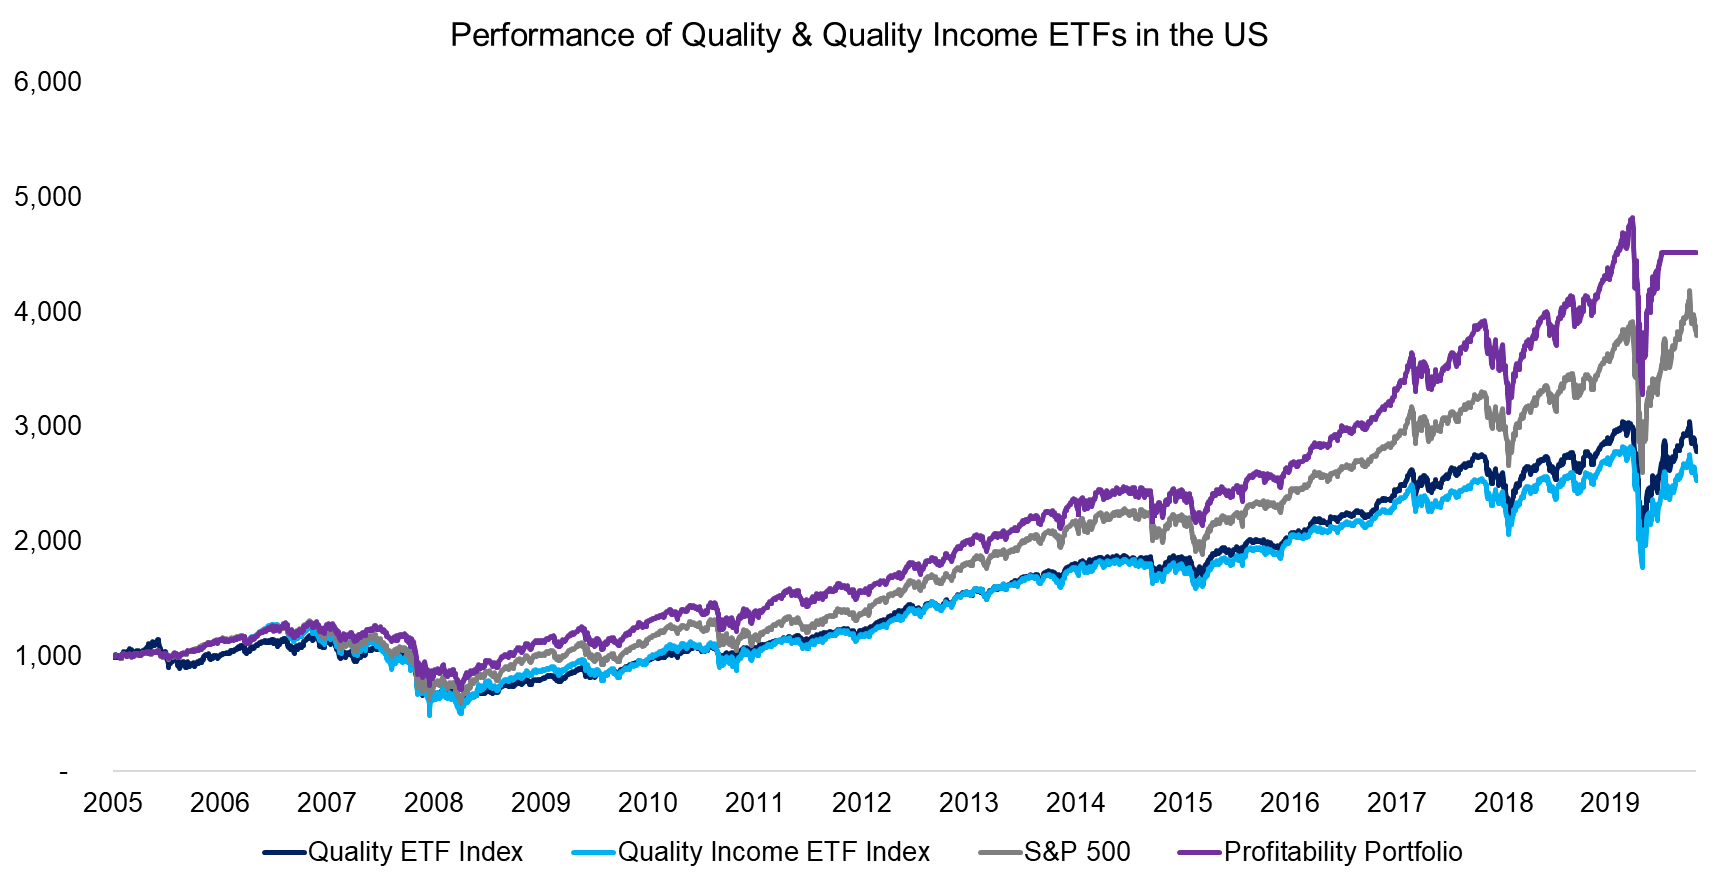 Performance of Quality & Quality Income ETFs in the US